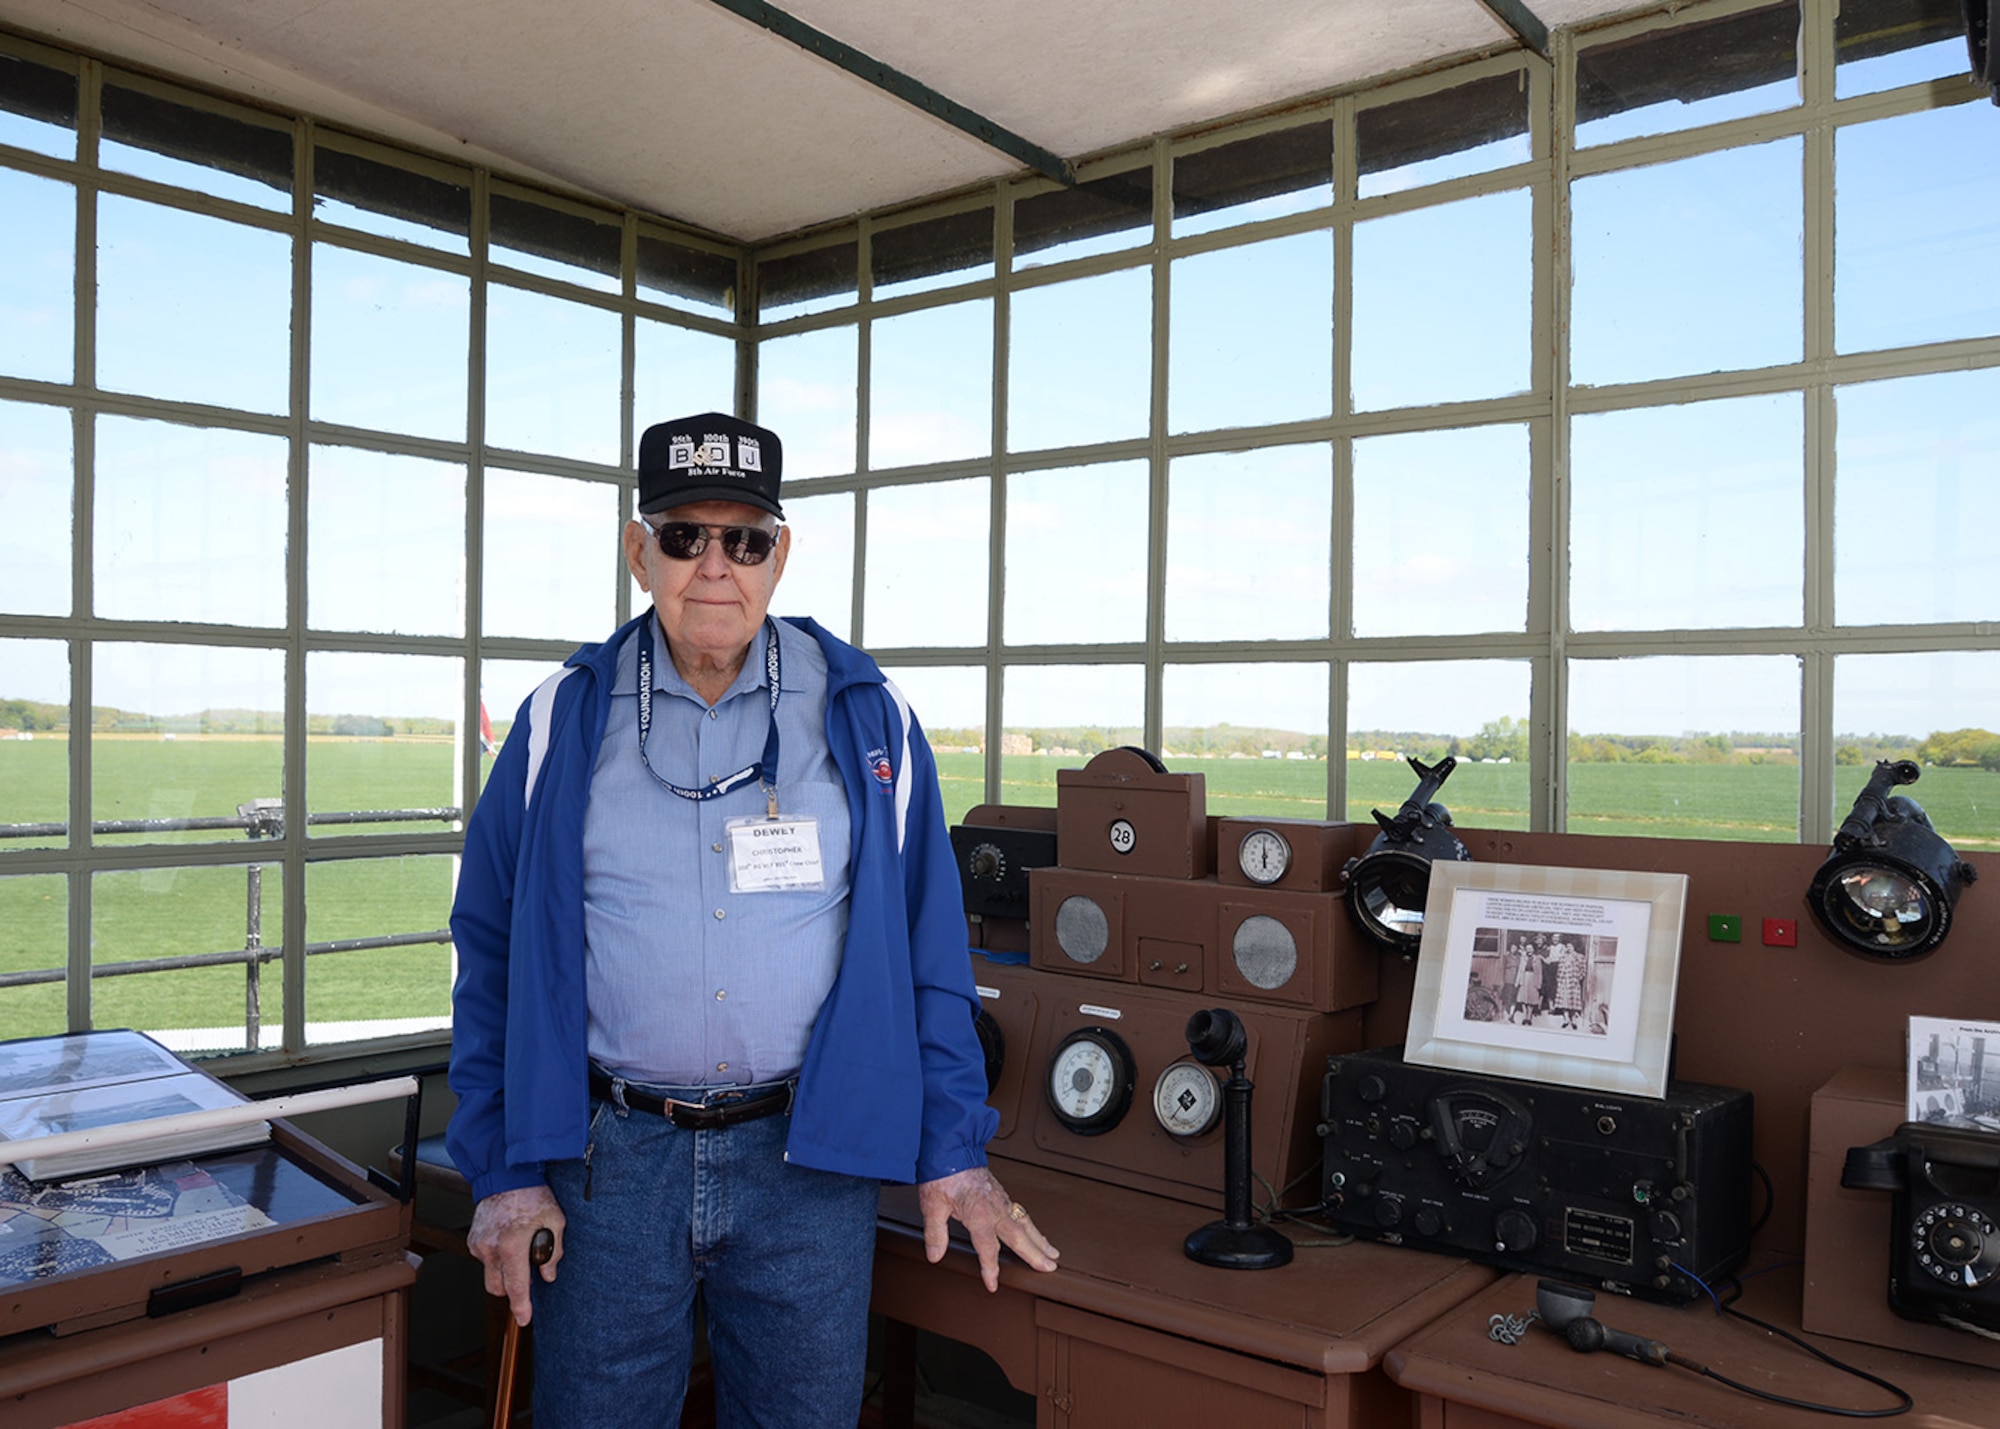 Master Sgt. (retired) Dewey Christopher, 100th Bombardment Group veteran and former B-17 crew chief, poses for a photograph May 10, 2017, in the old air traffic control tower at Parham Airfield Museum, England. Christopher and other 100th BG veterans, along with their families and other members of the 100th BG Foundation, joined 100th Air Refueling Wing members on a heritage trail visit of former World War II bases in East Anglia. (U.S. Air Force photo by Karen Abeyasekere)